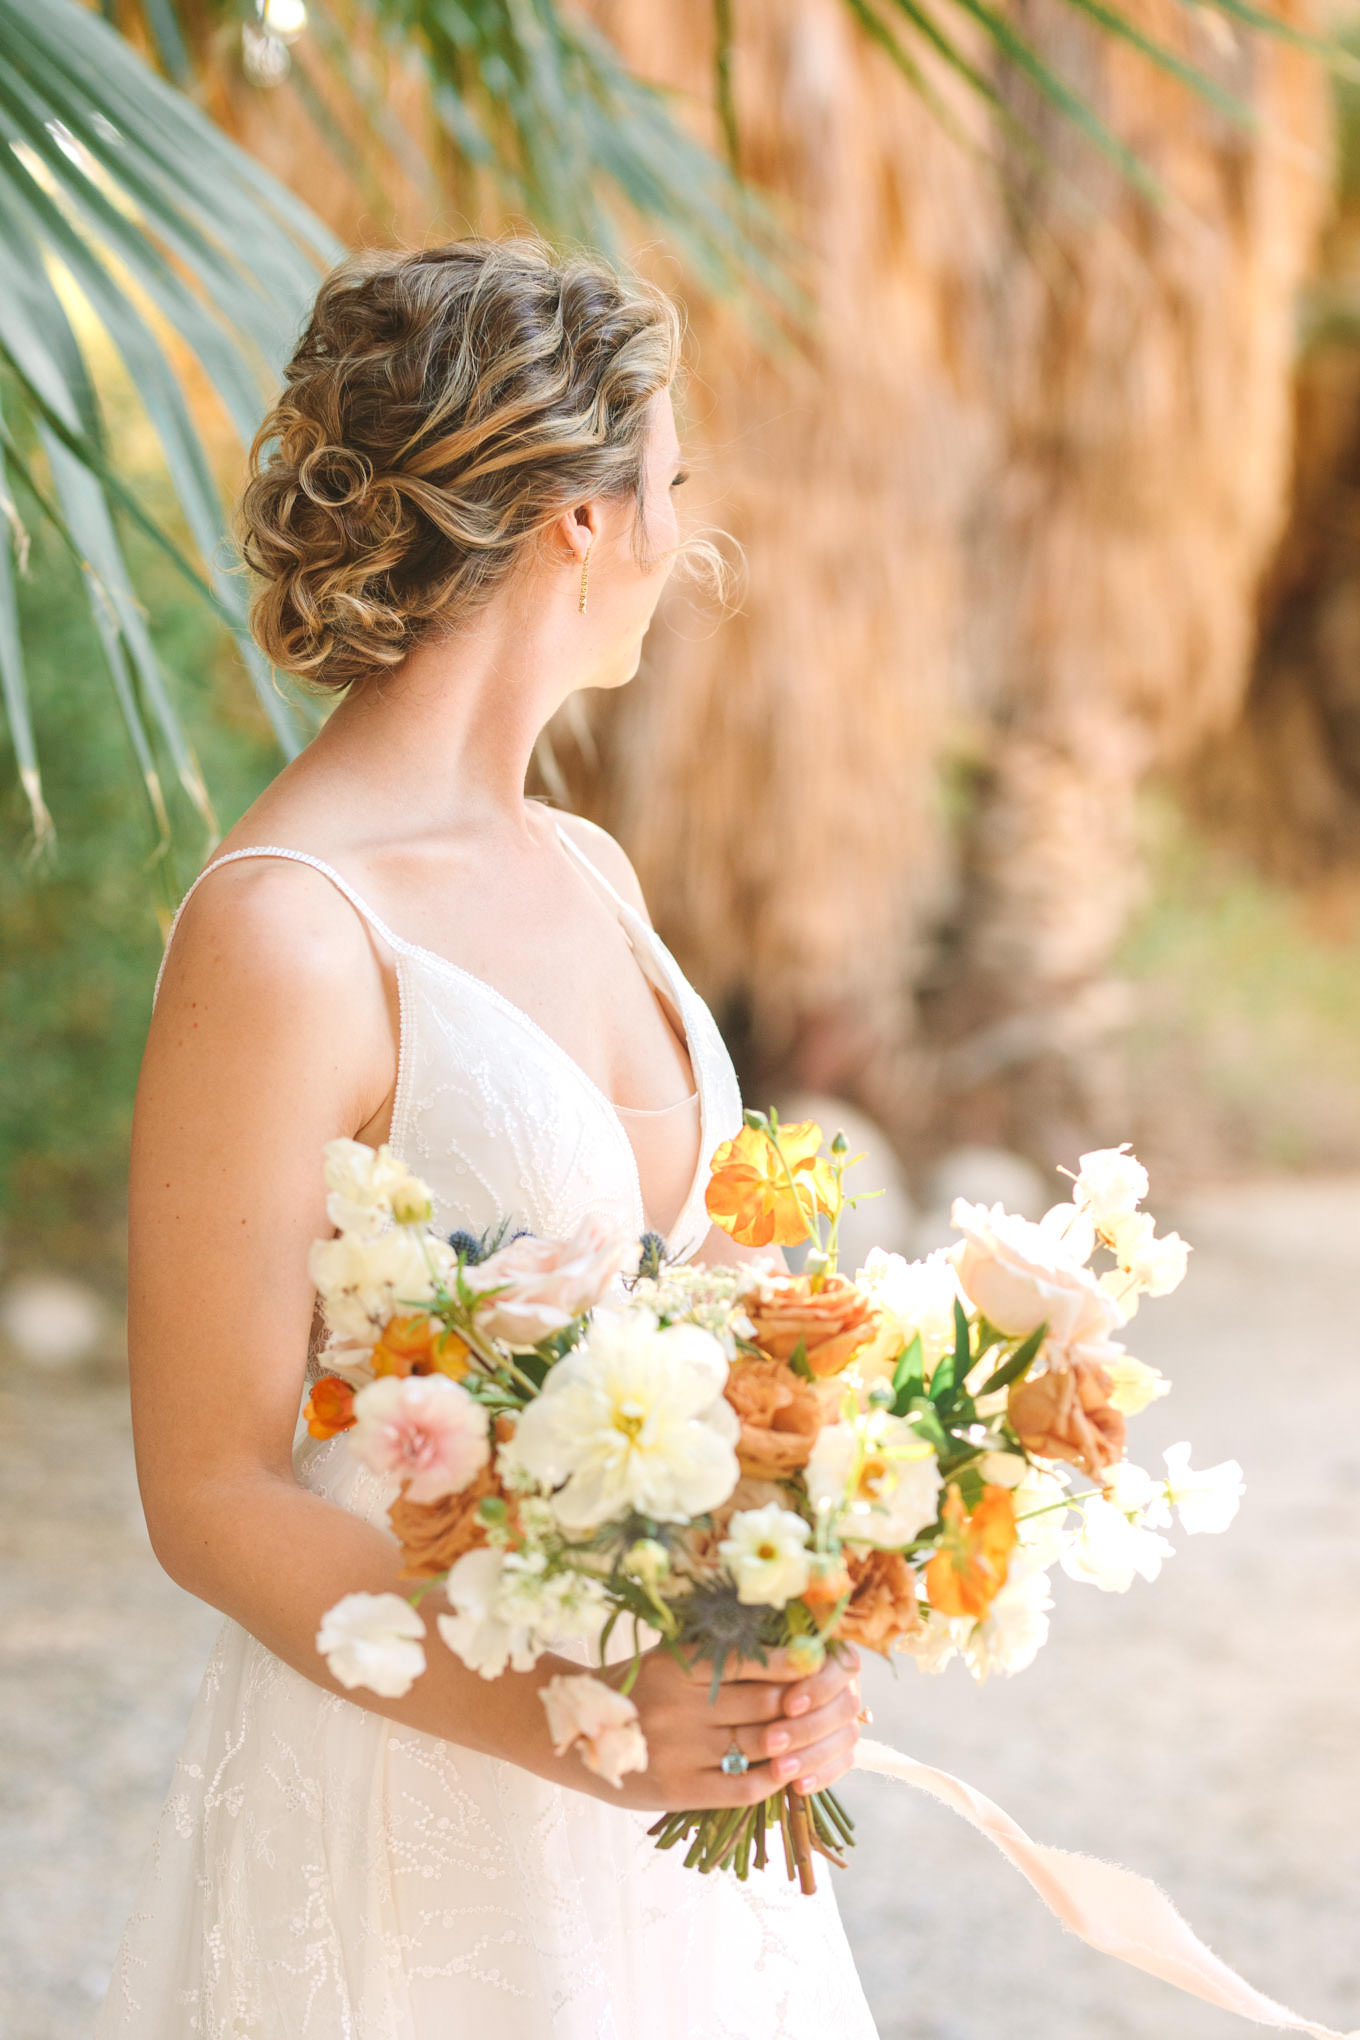 Bridal updo | Living Desert Zoo & Gardens wedding with unique details | Elevated and colorful wedding photography for fun-loving couples in Southern California |  #PalmSprings #palmspringsphotographer #gardenwedding #palmspringswedding  Source: Mary Costa Photography | Los Angeles wedding photographer 